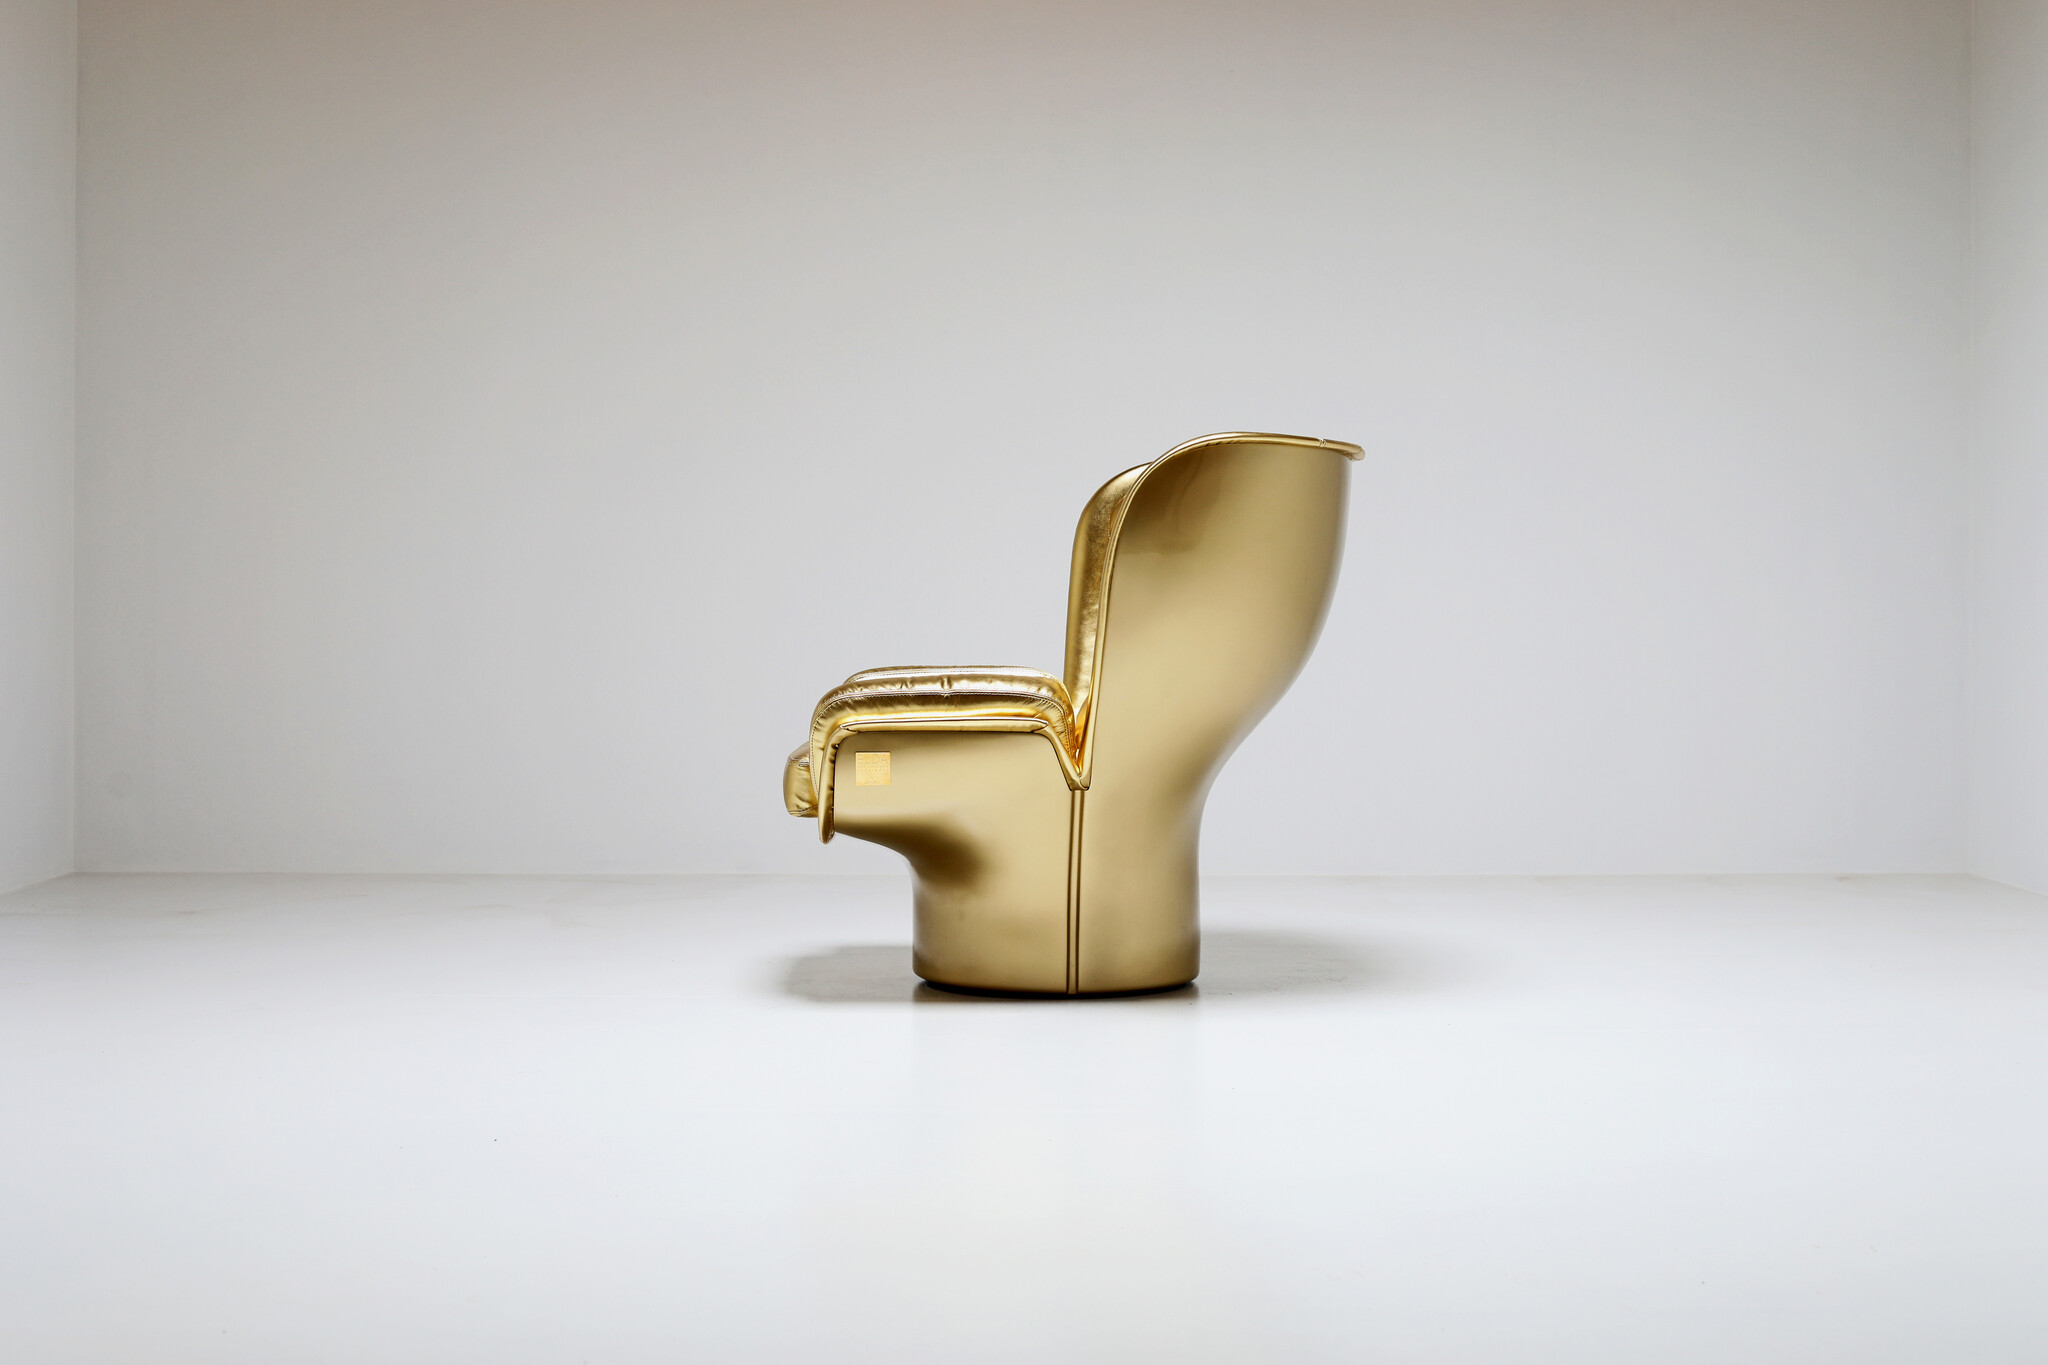 Golden Elda chair Limited edition by Joe Colombo